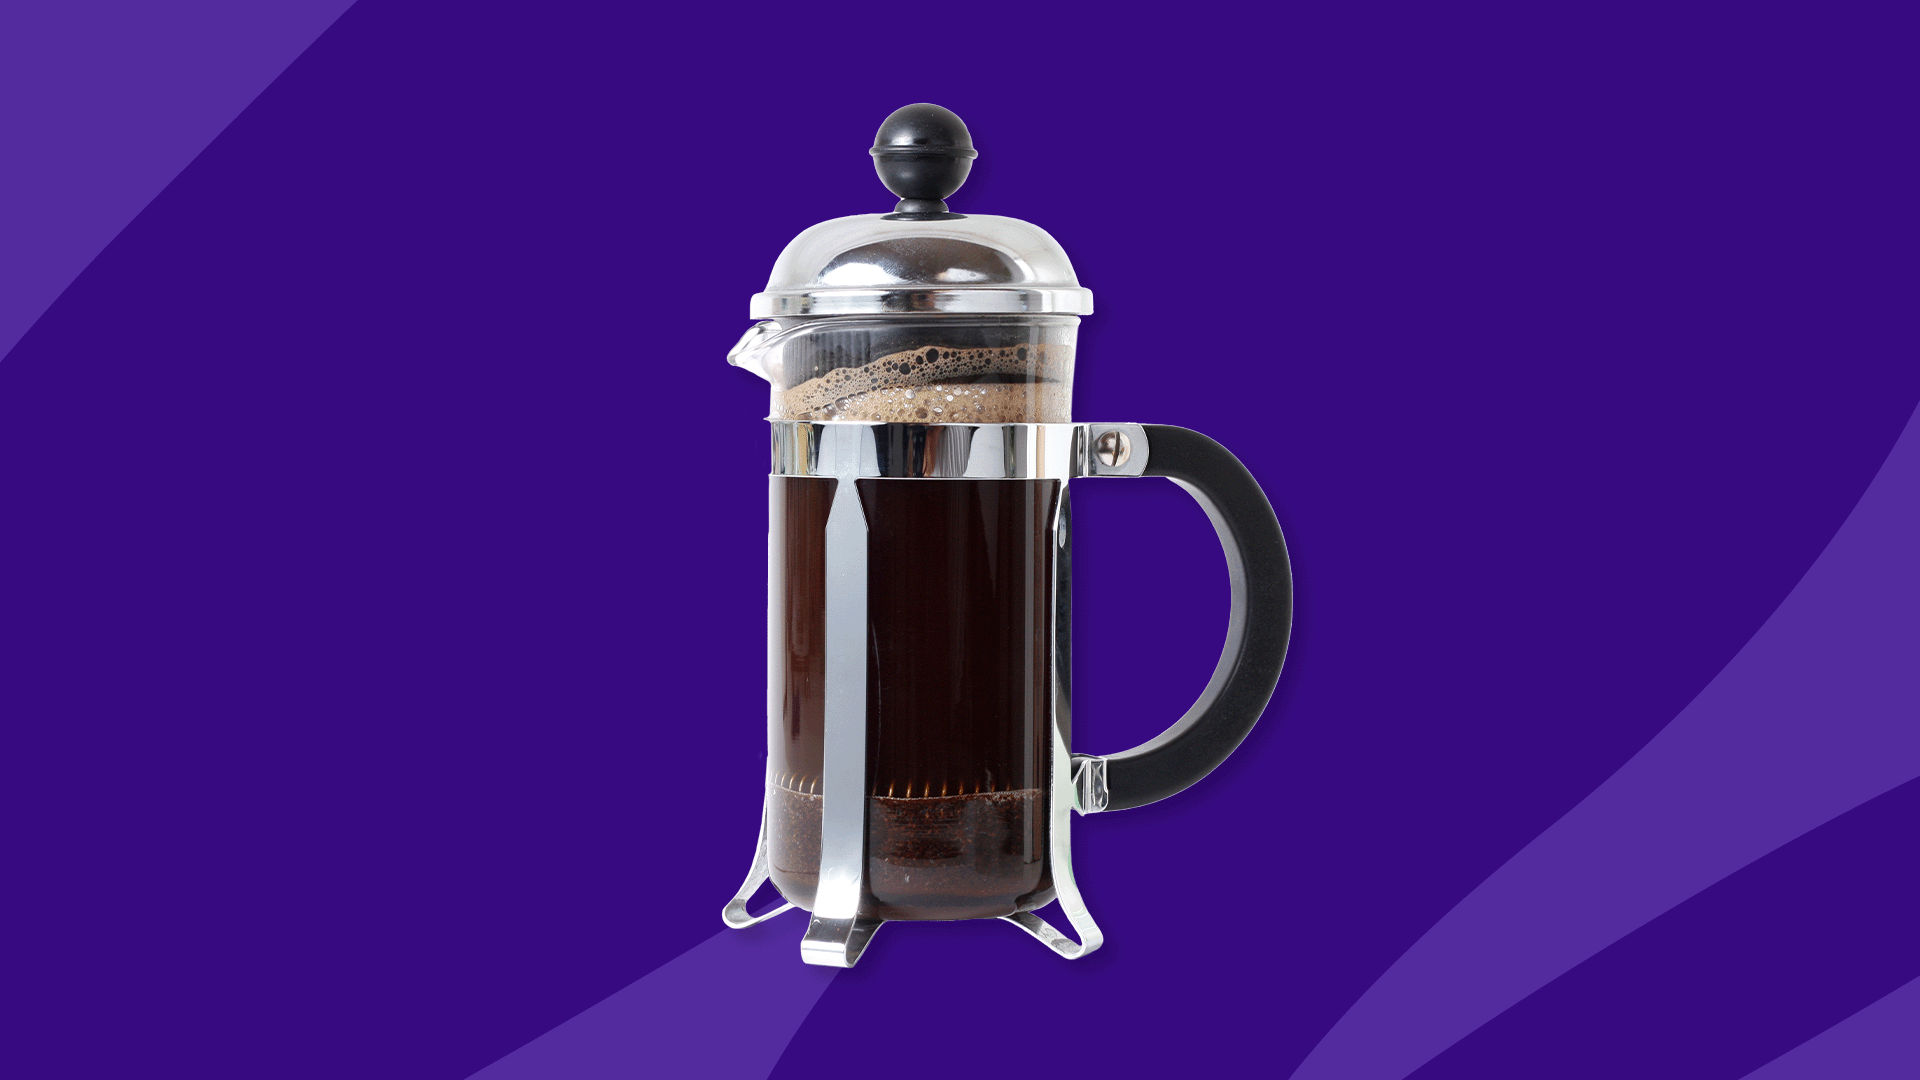 A French press represents the health benefits of coffee